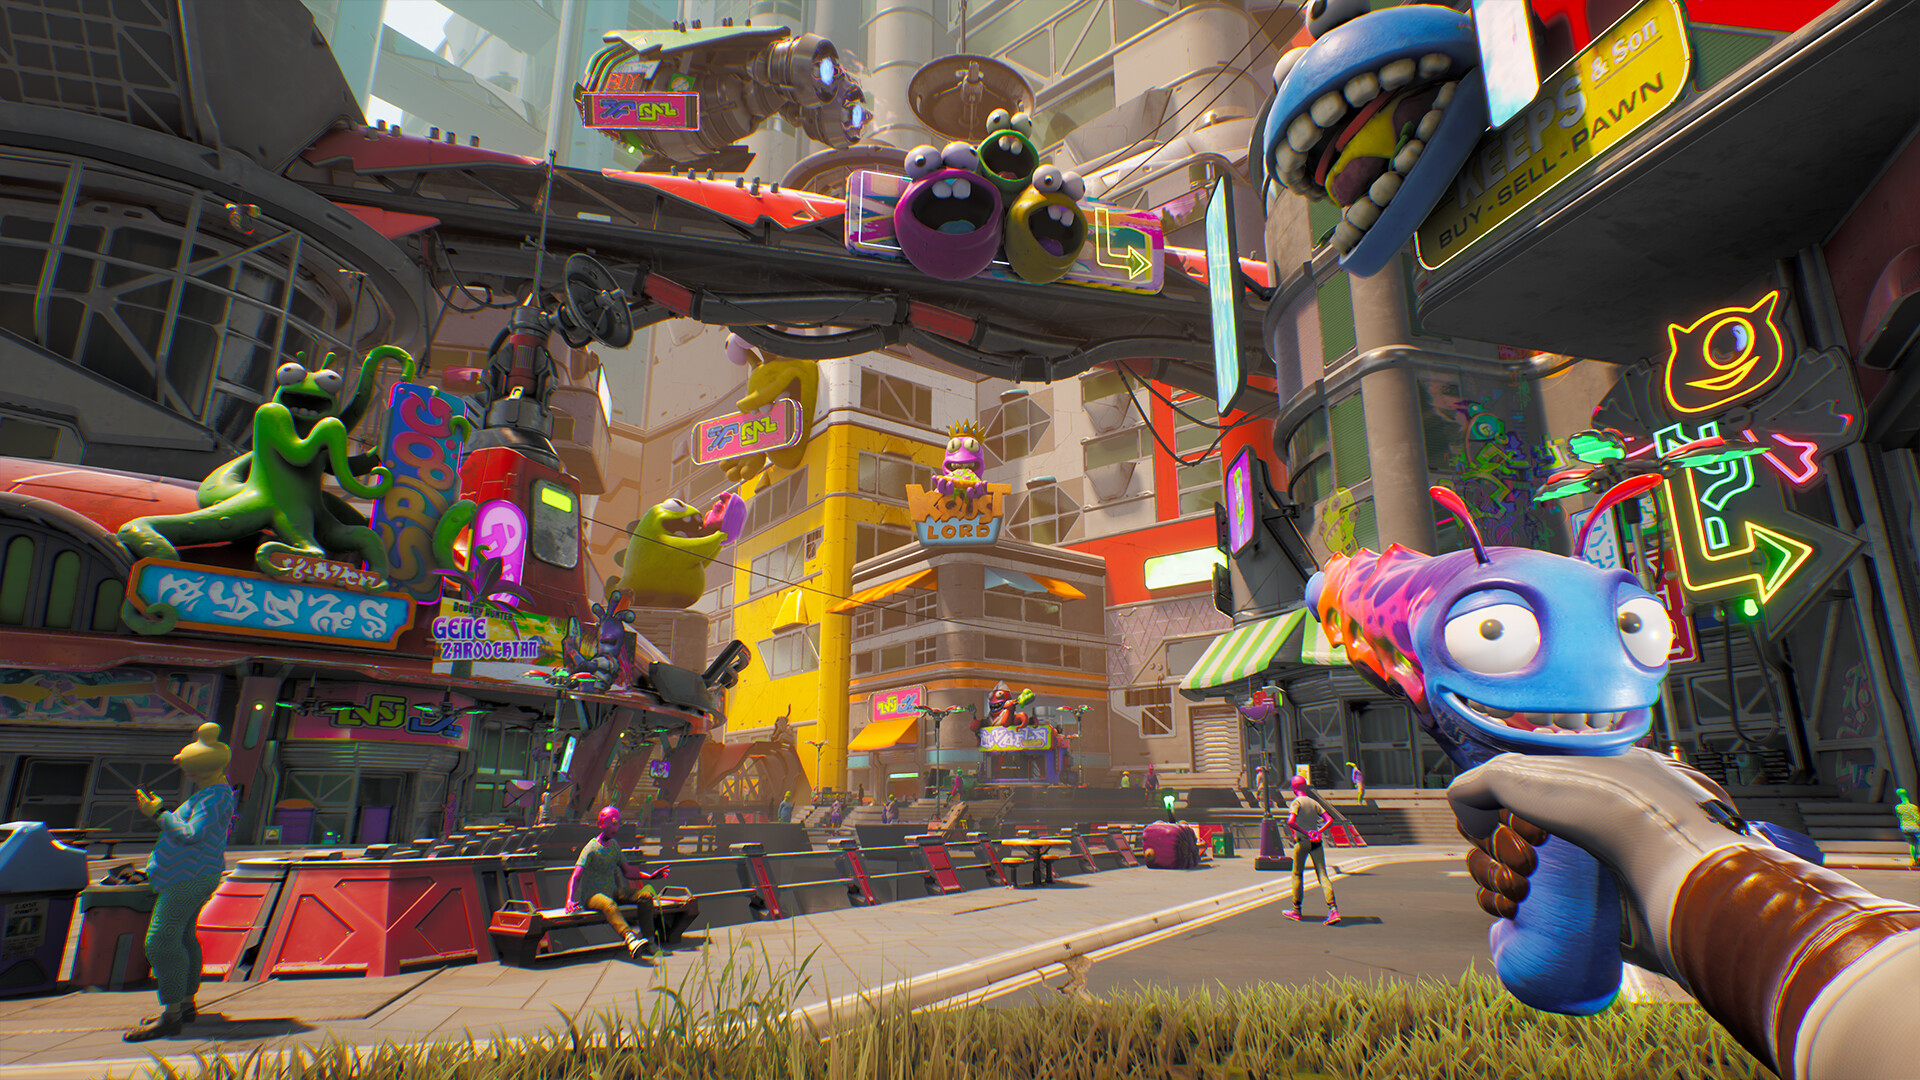 High on Life' is far more fun than its goofy trailer suggests